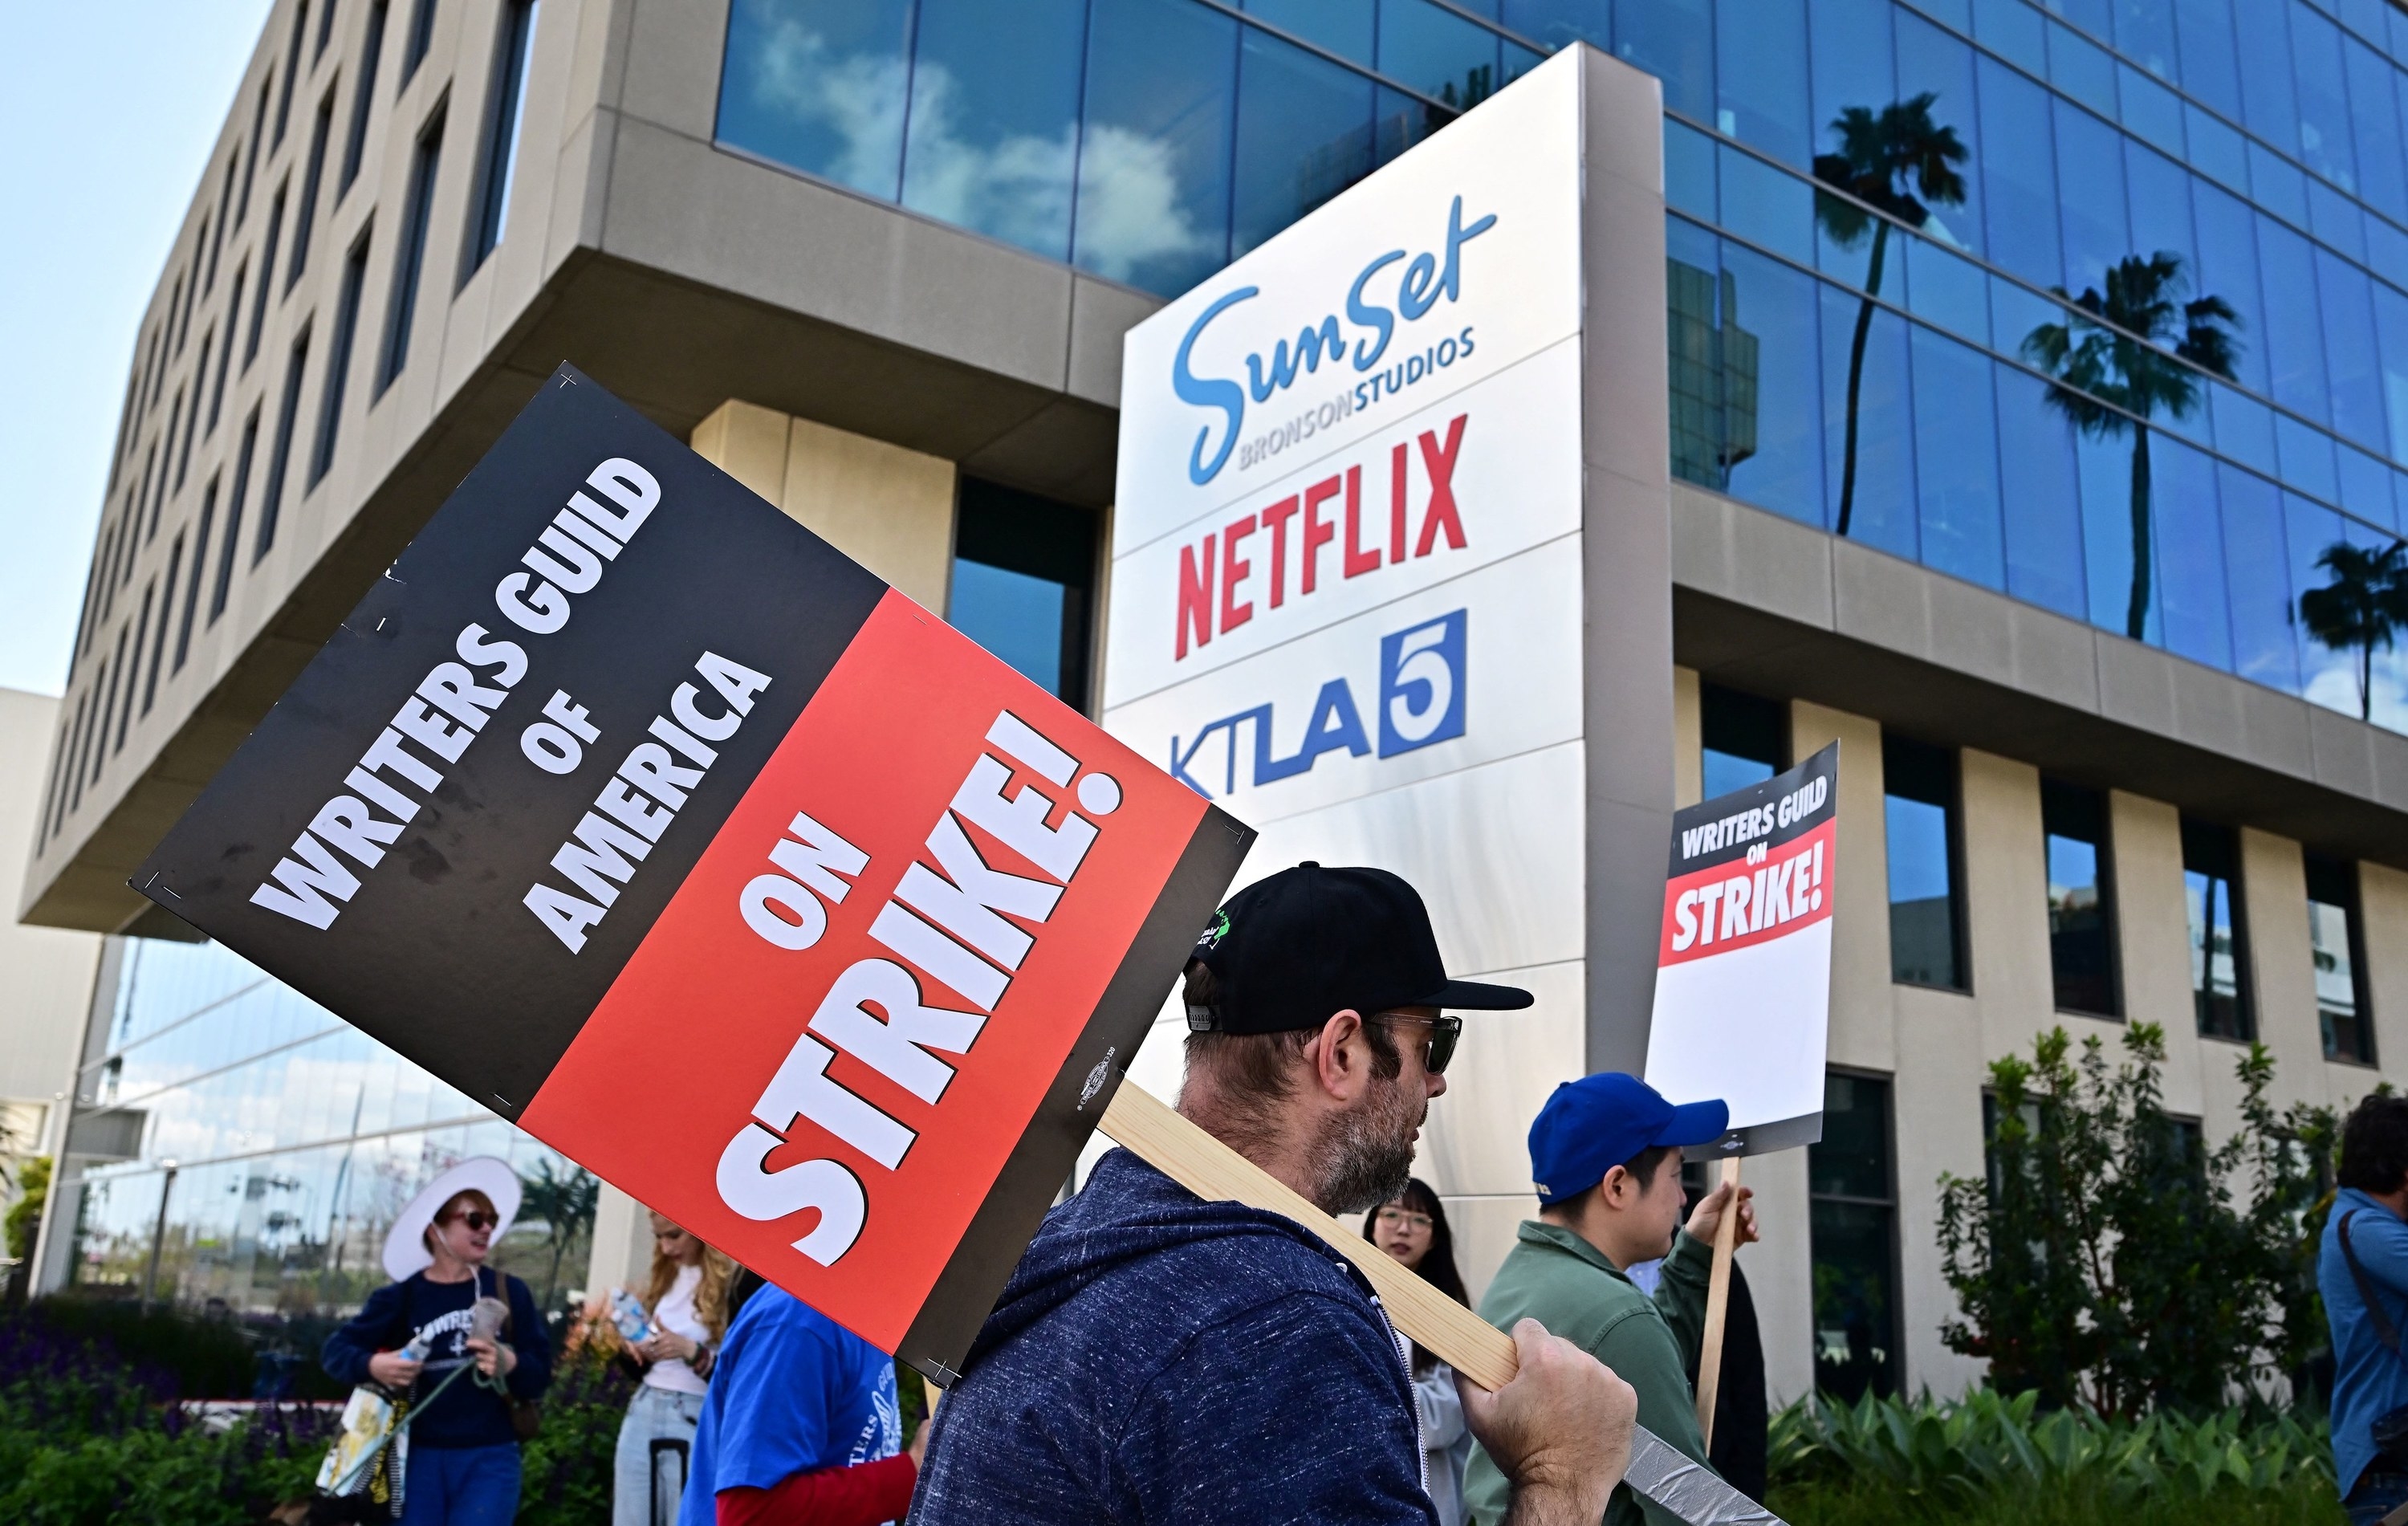 A supporter of the Writers Guild of America holding a picket sign in front of a production building with a Netflix sign